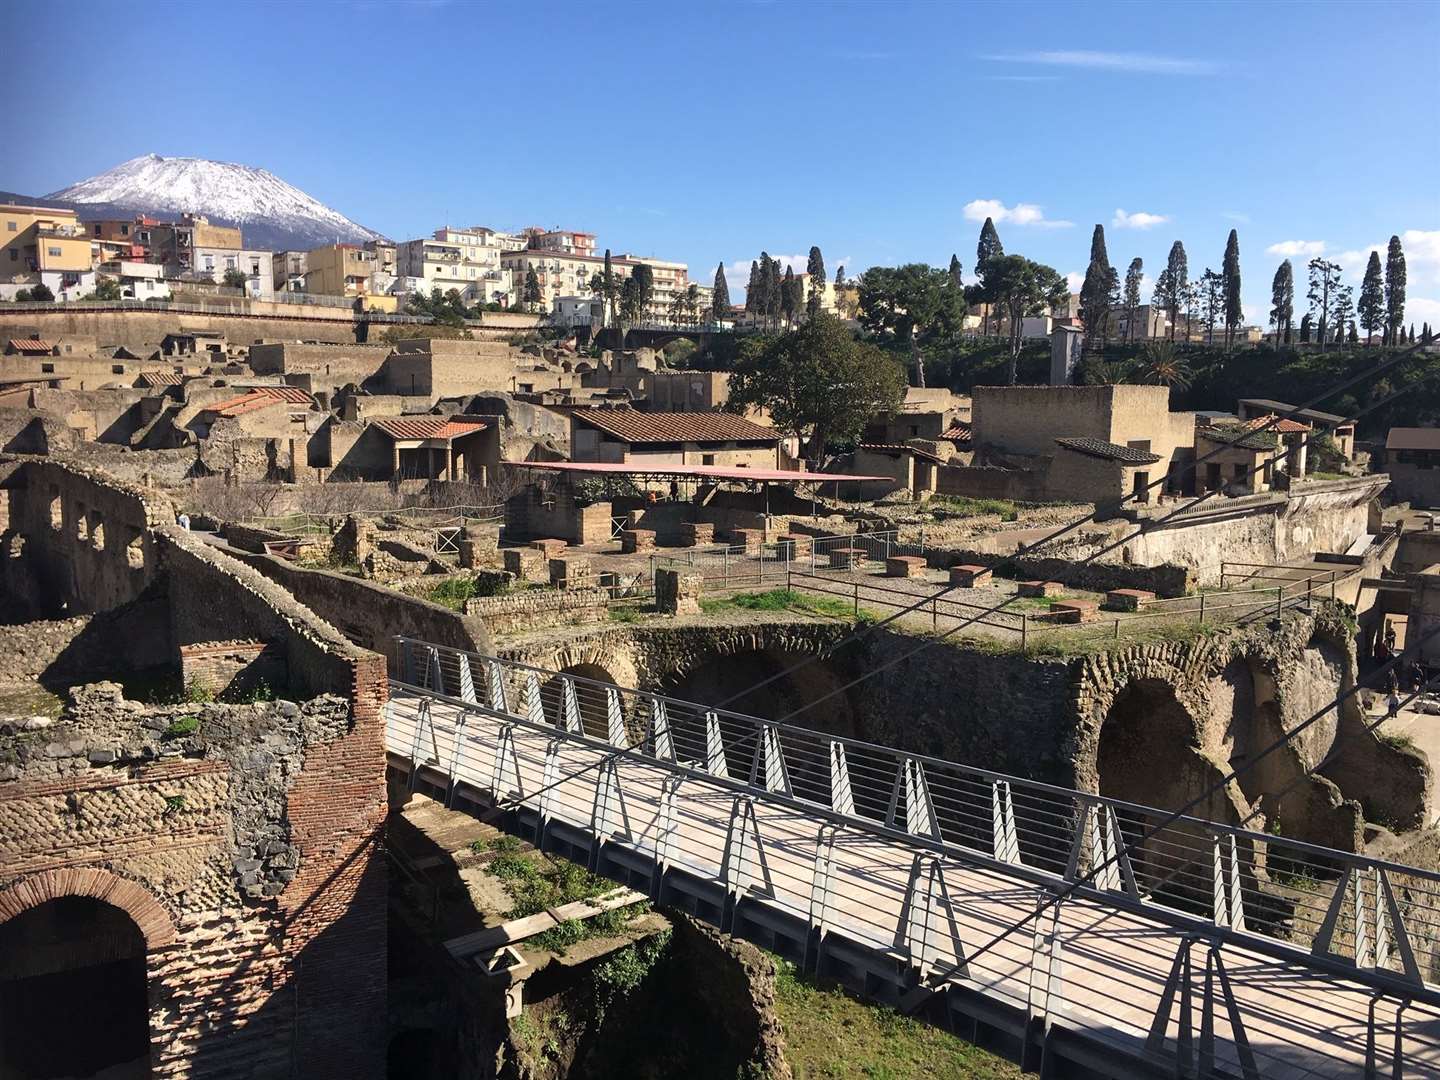 Herculaneum, near Naples, is one of the best preserved Roman towns